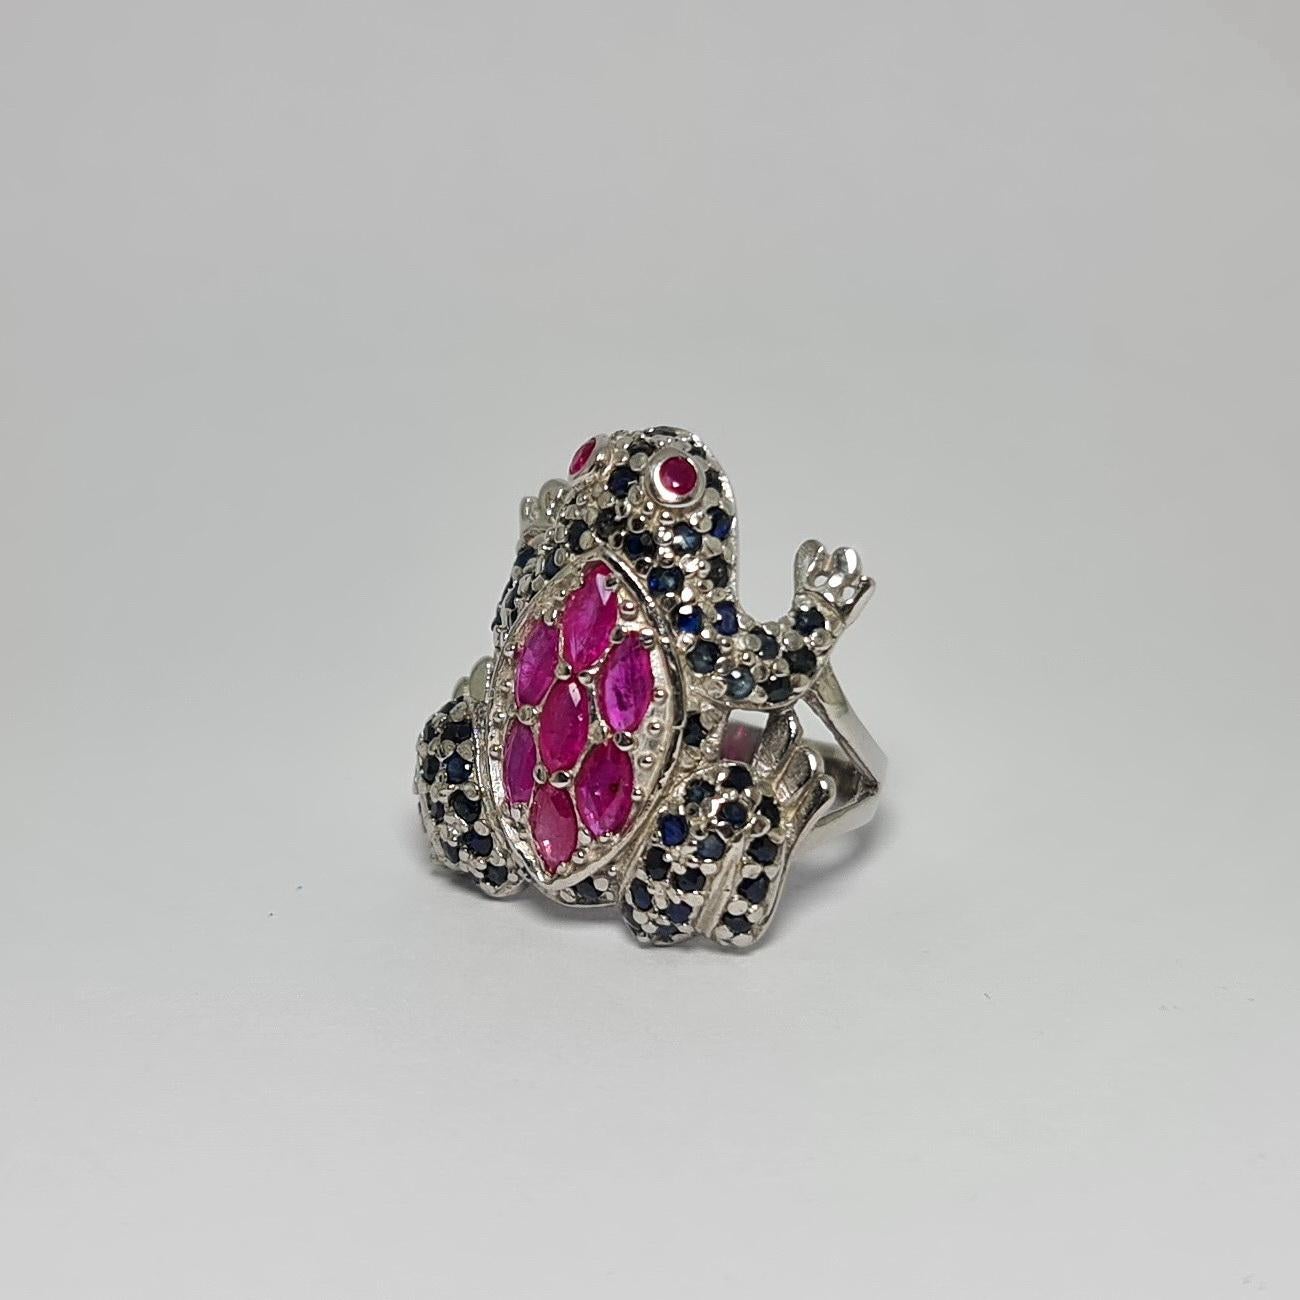  8.5 CTS Natural untreated Thailand Blue Sapphires and Natural Thailand glass filled rubies 3.5 CTS   Frog design Ring set in.925 Sterling Silver Rhodium Plated Ring 